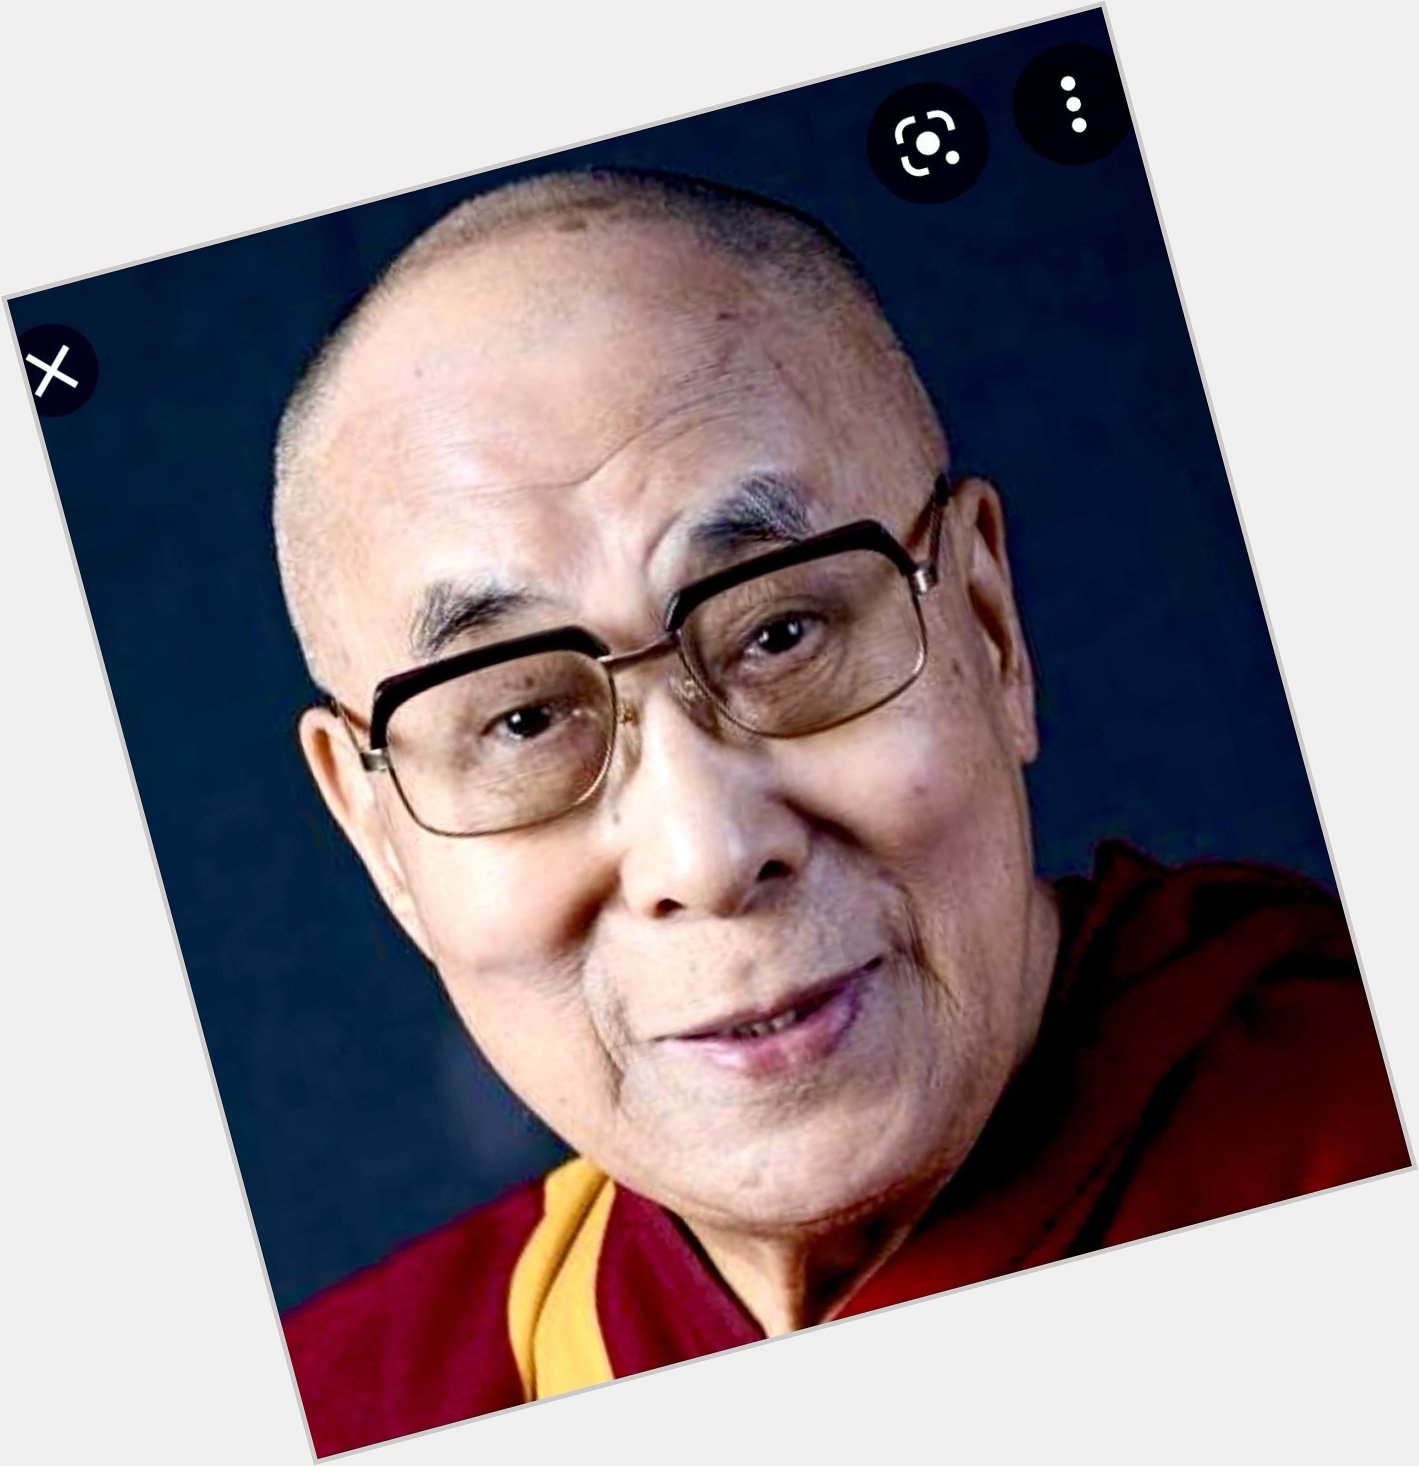 Happy birthday to the Dalai Lama, one of the most remarkable figures of our times. 